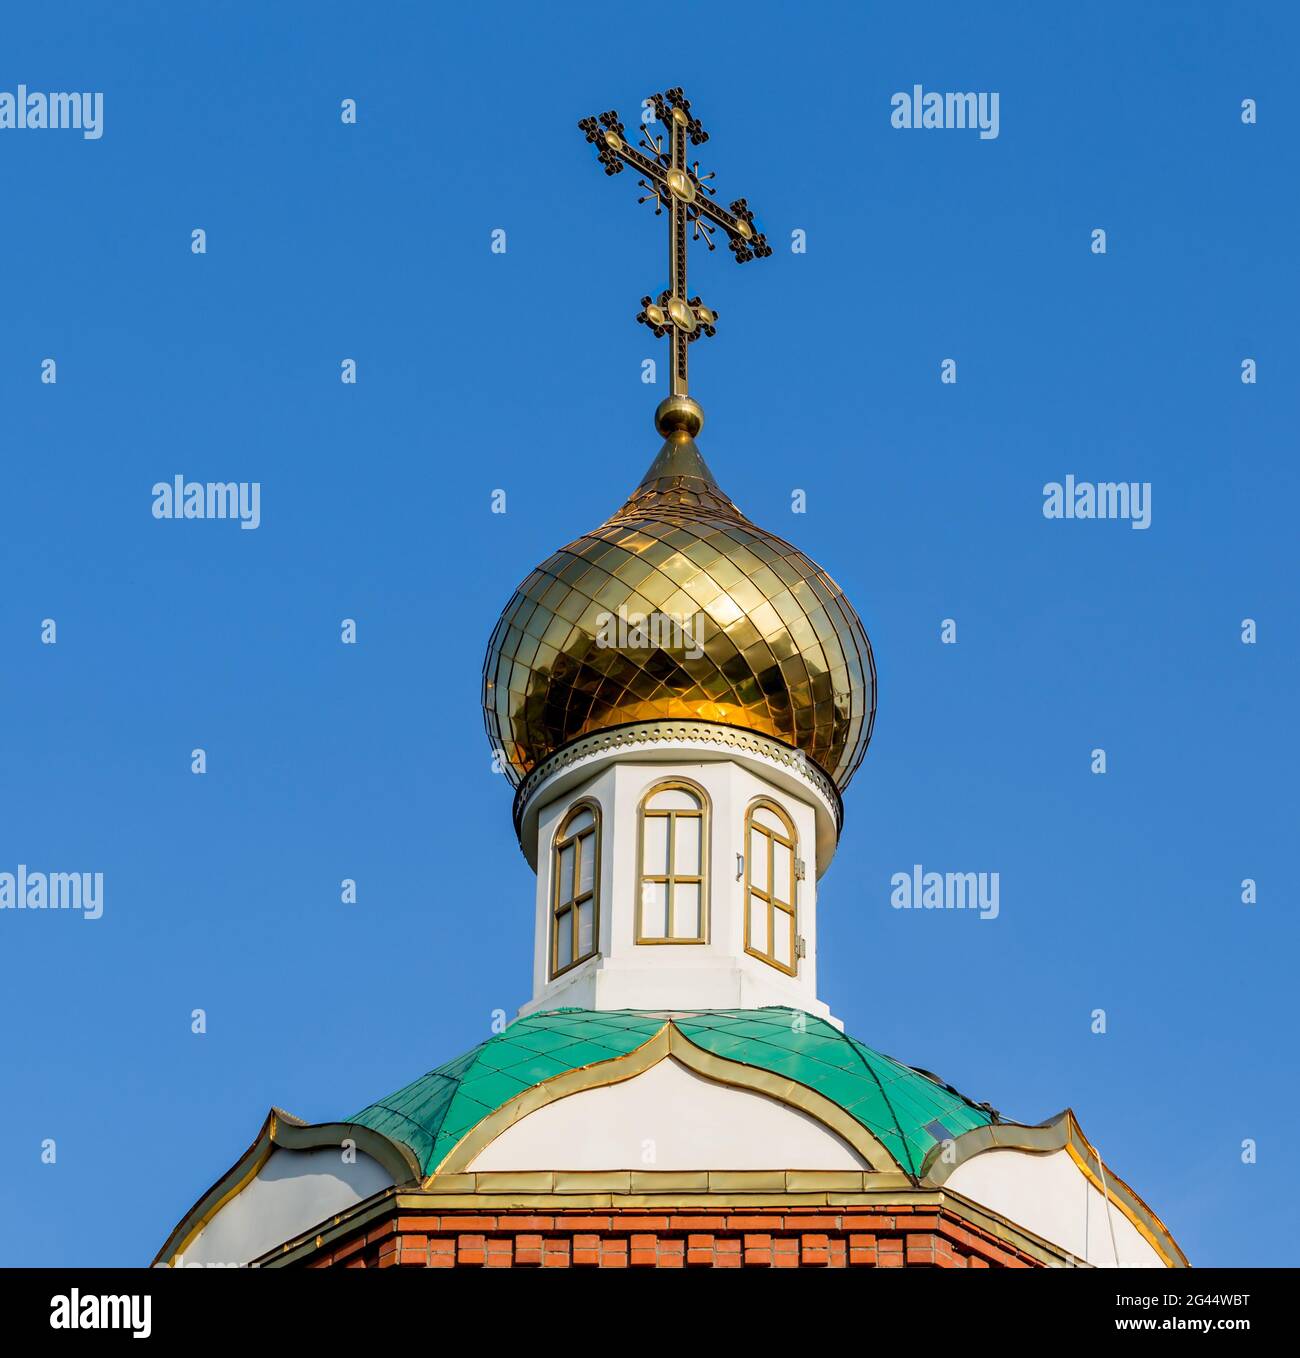 Orthodox cross on the roof of the church in a sunny day. Stock Photo